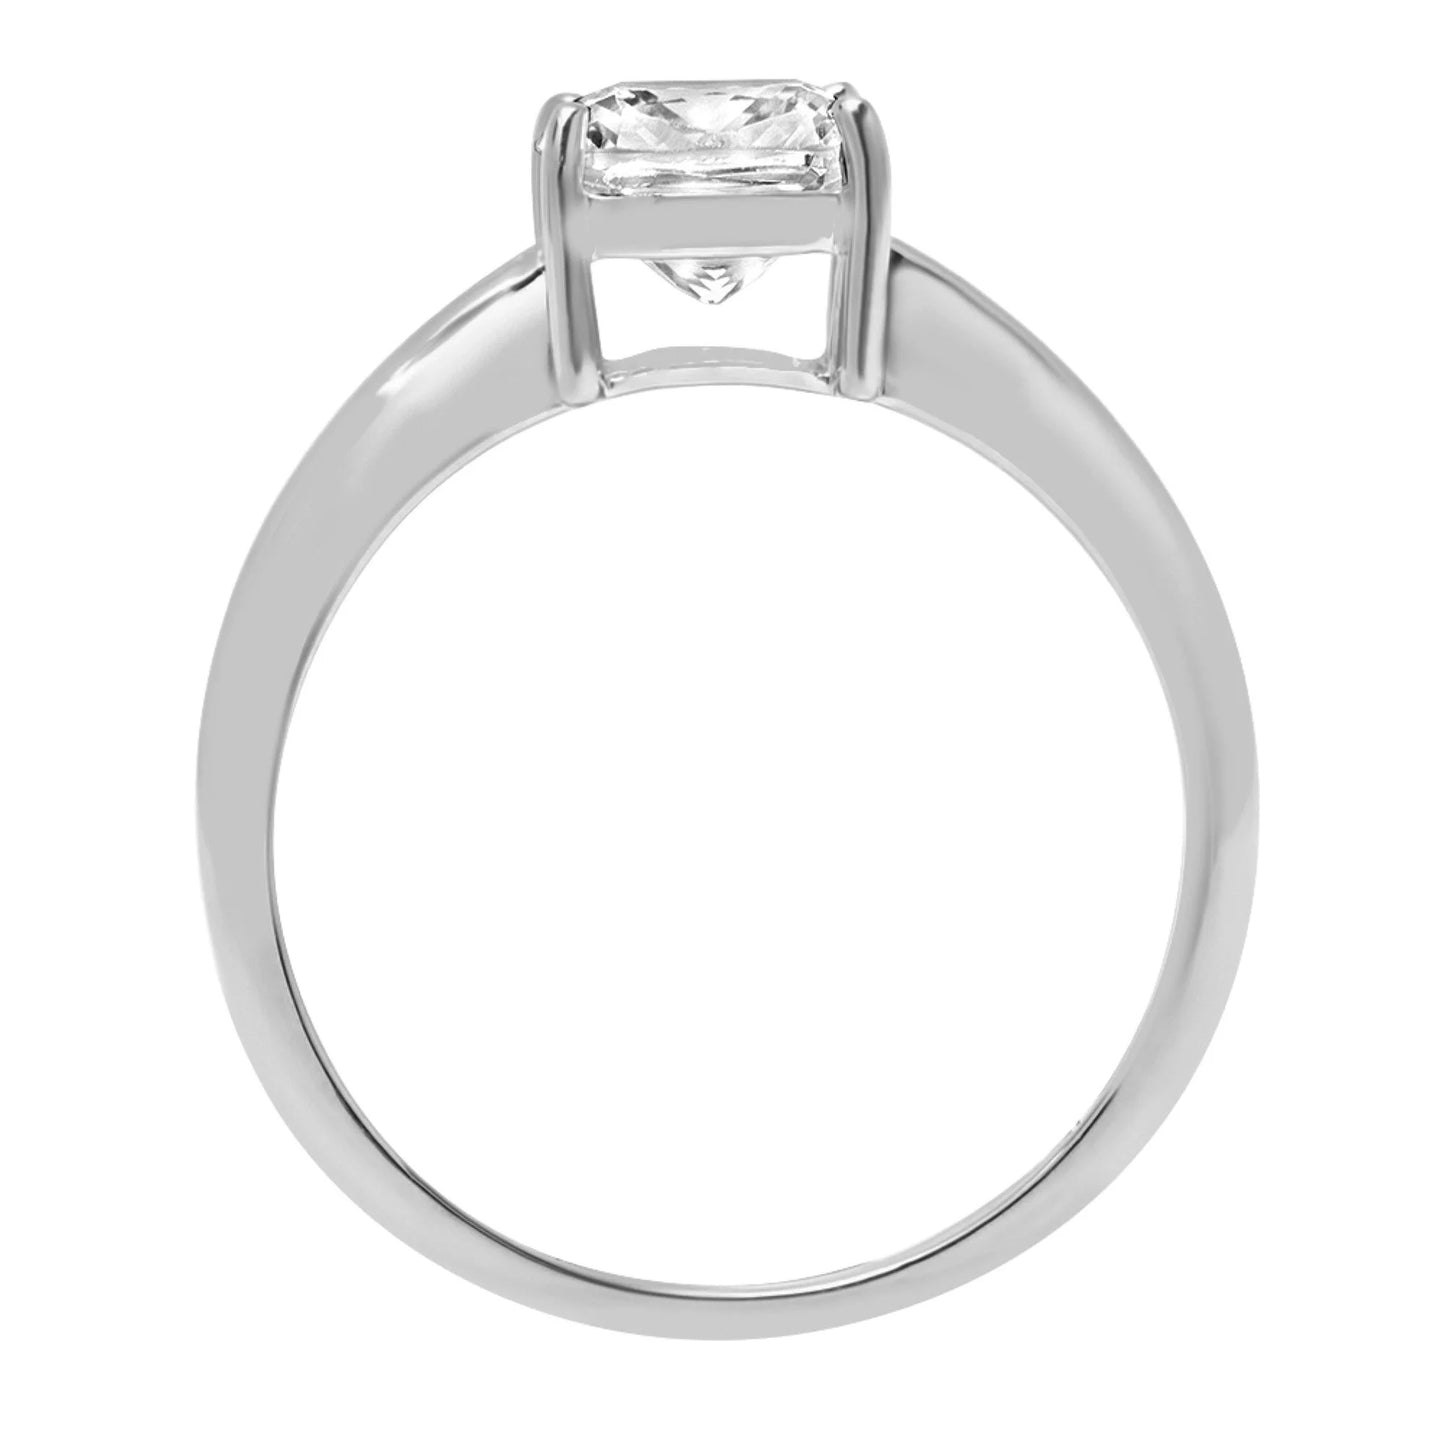 1.5ct cushion cut clear moissanite 14k white gold anniversary engagement ring size 4.5